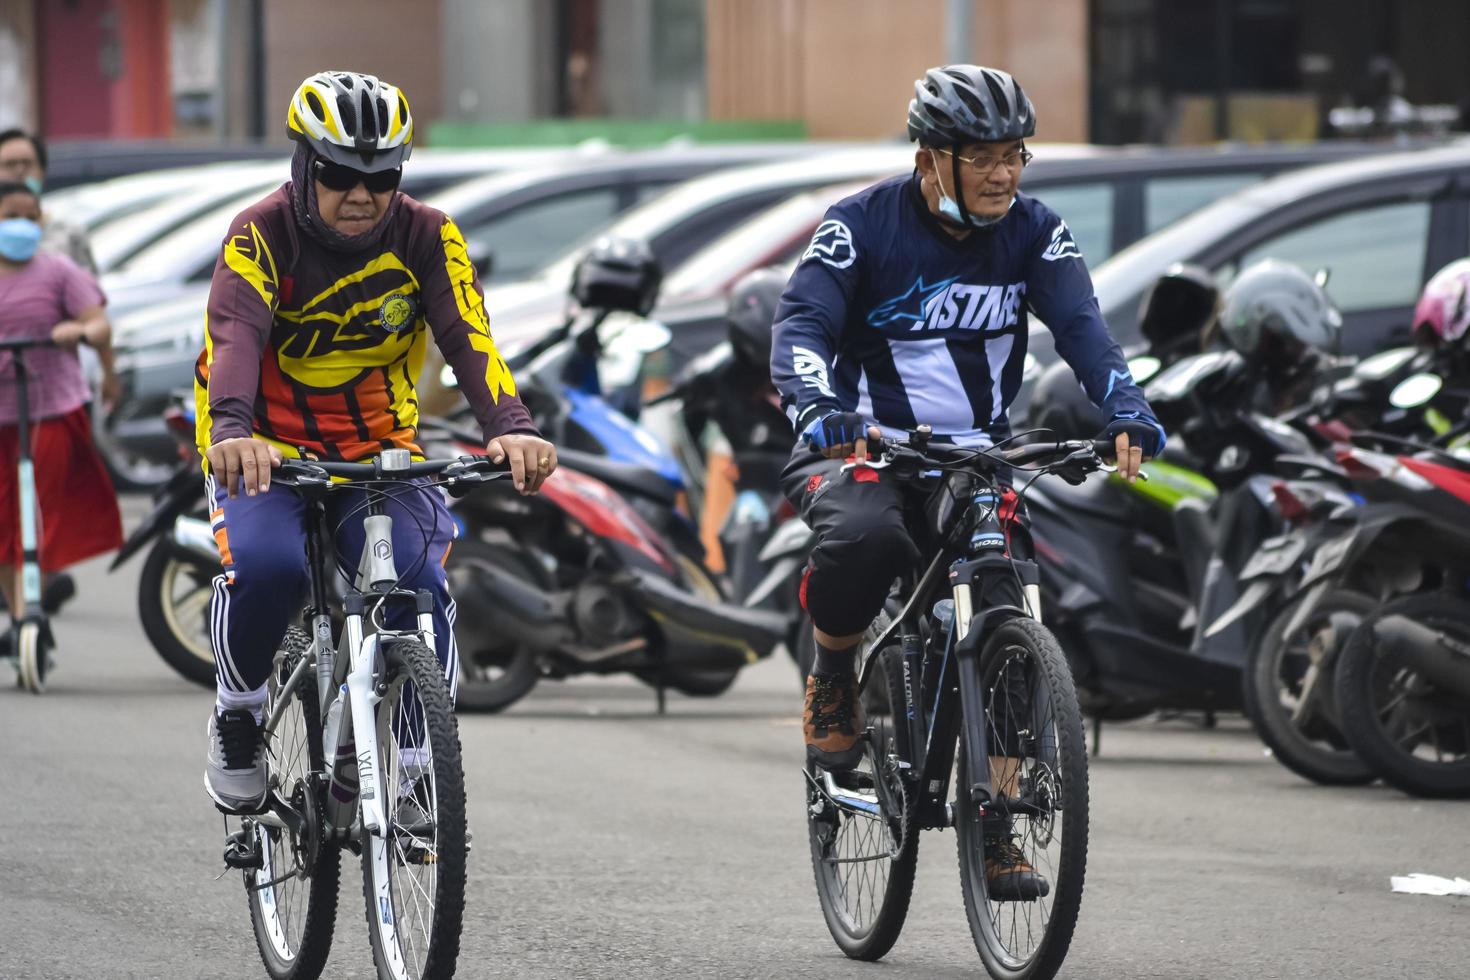 Bekasi, West Java, Indonesia, March 5th 2022. People exercising bicycles in city park on saturday photo